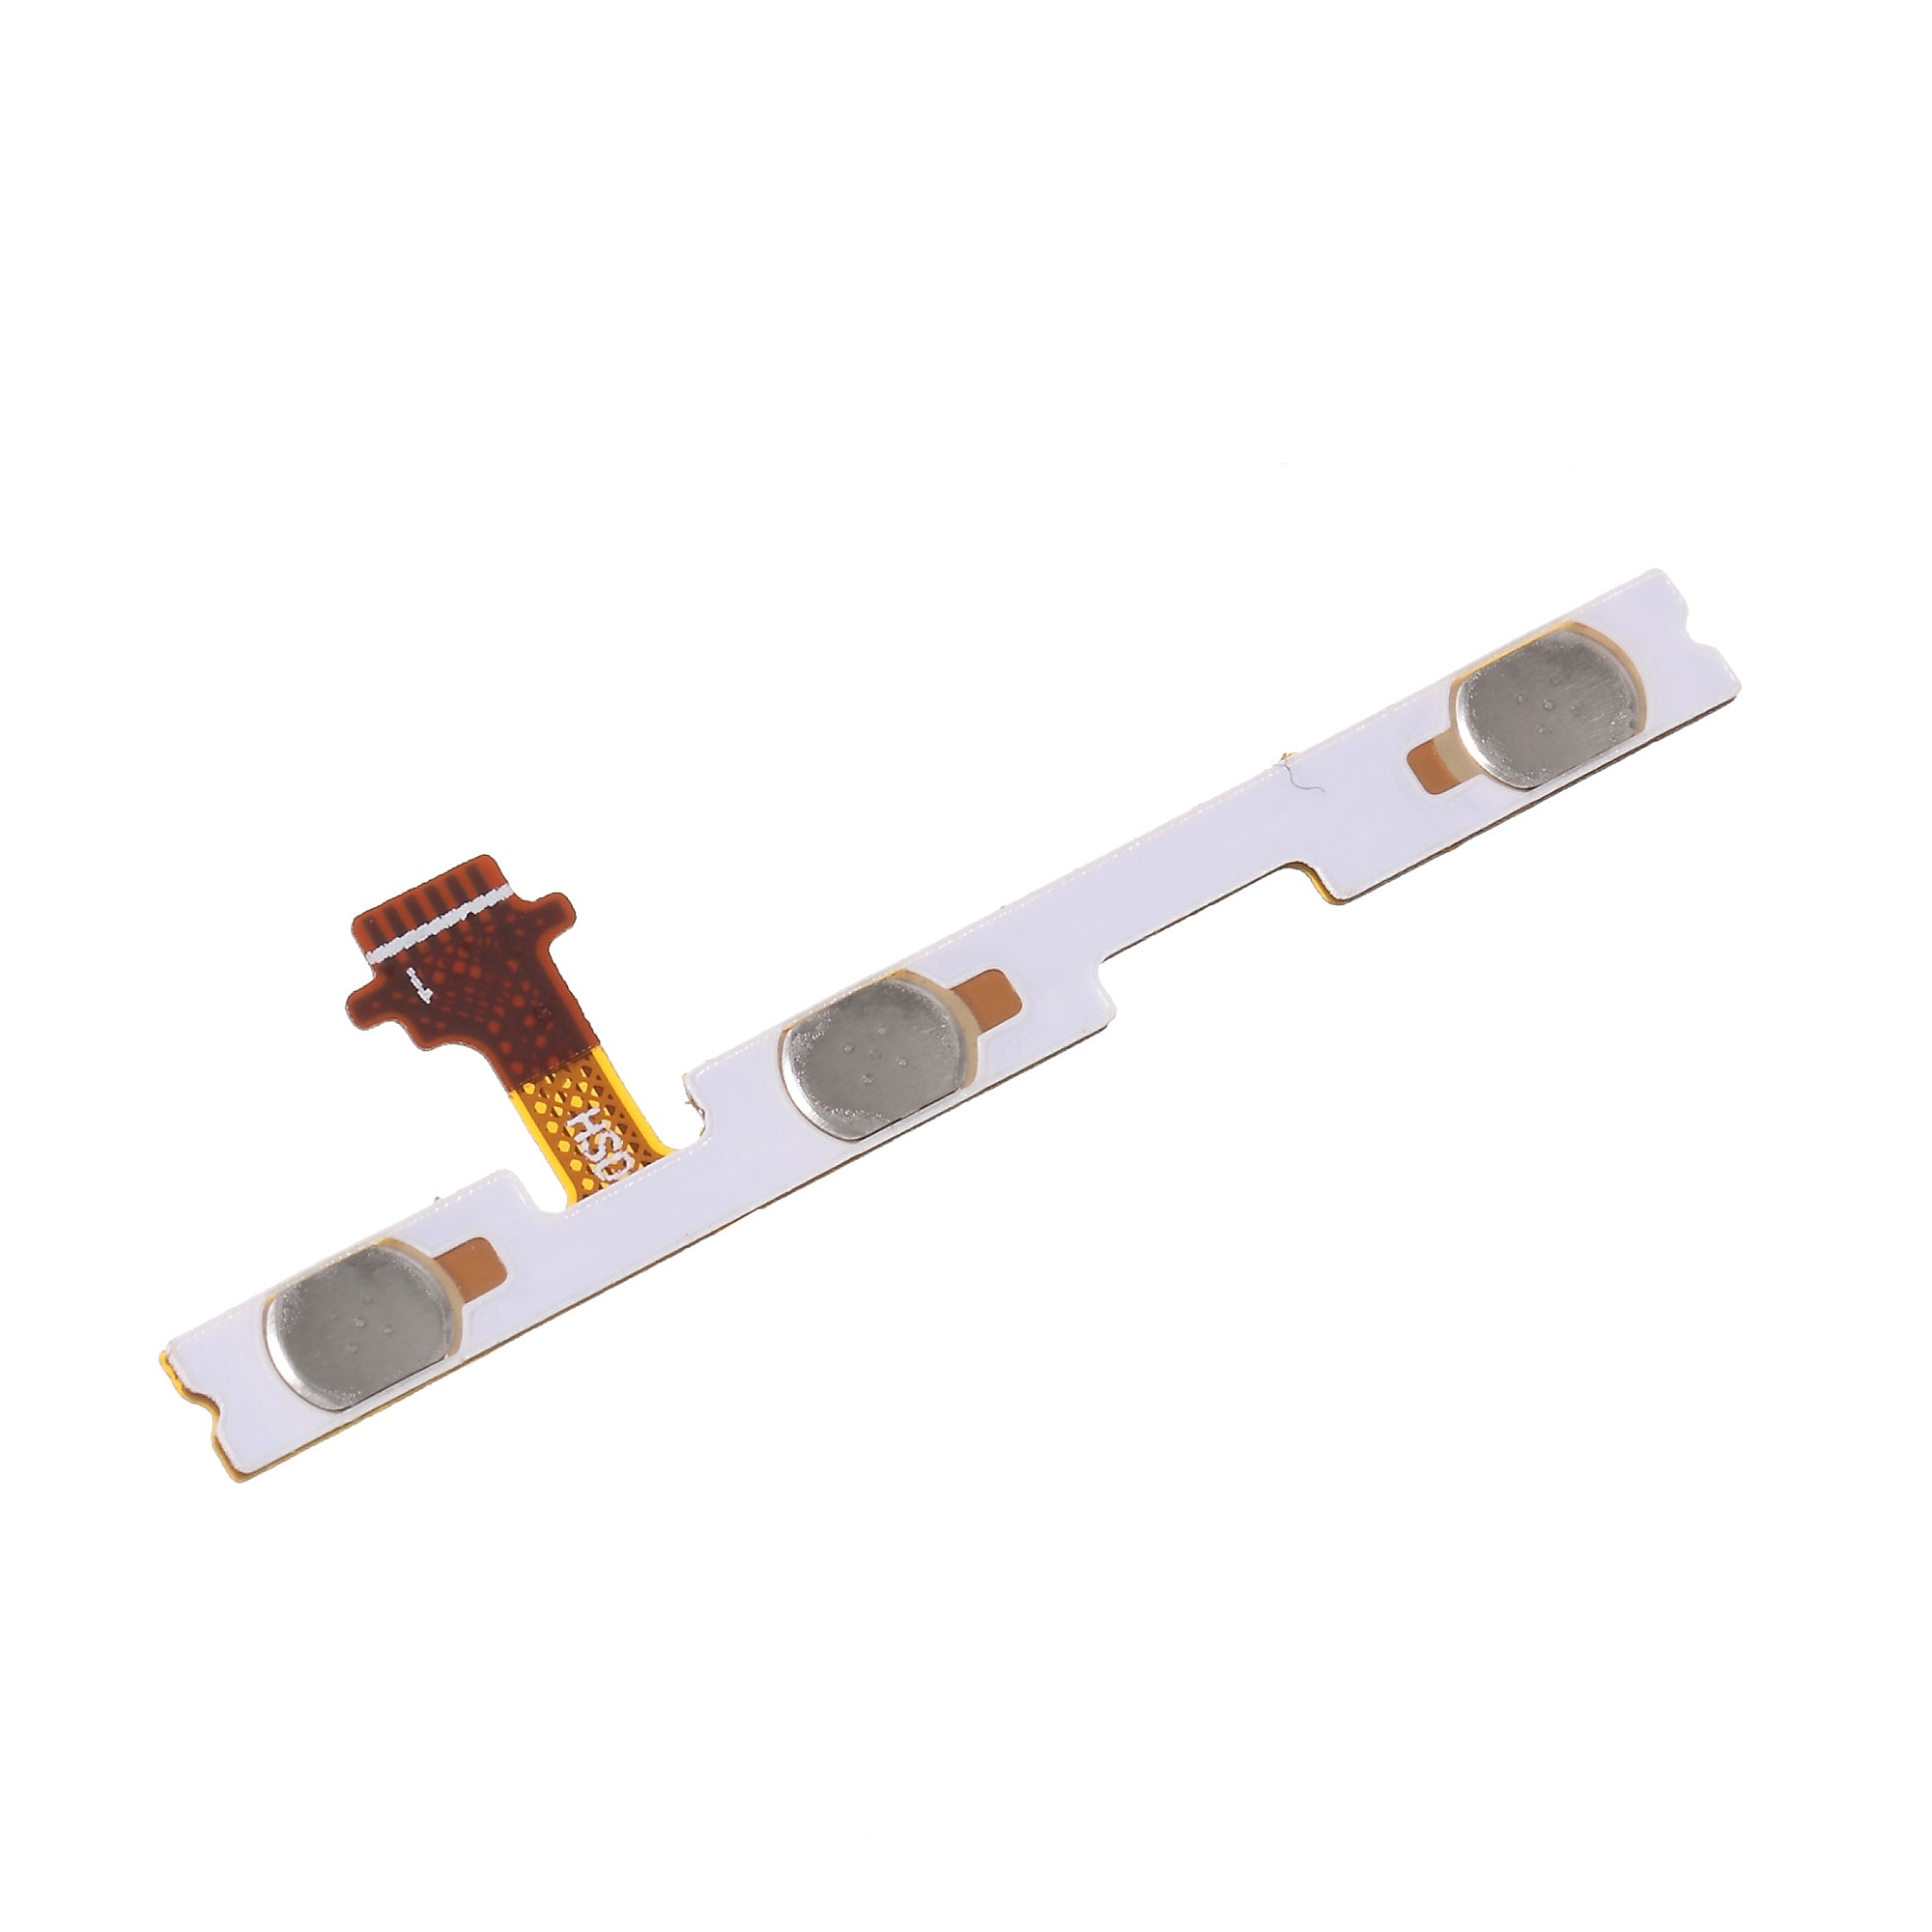 OEM Power On/Off and Volume Buttons Flex Cable for Huawei P9 lite mini / Y6 Pro (2017) / Enjoy 7